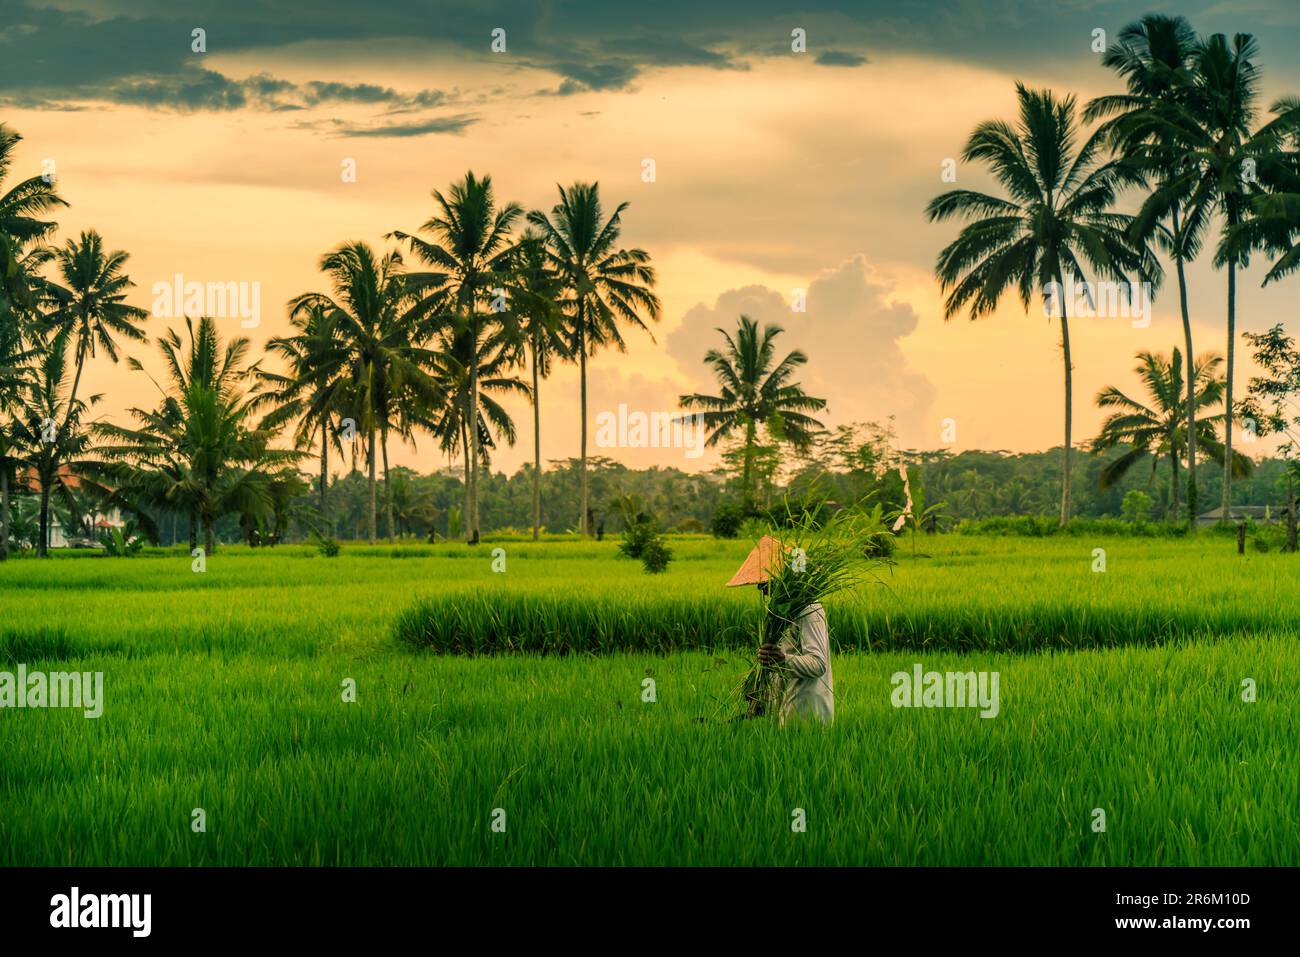 View of a Balinese wearing a typical conical hat working in the paddy fields, Sidemen, Kabupaten Karangasem, Bali, Indonesia, South East Asia, Asia Stock Photo